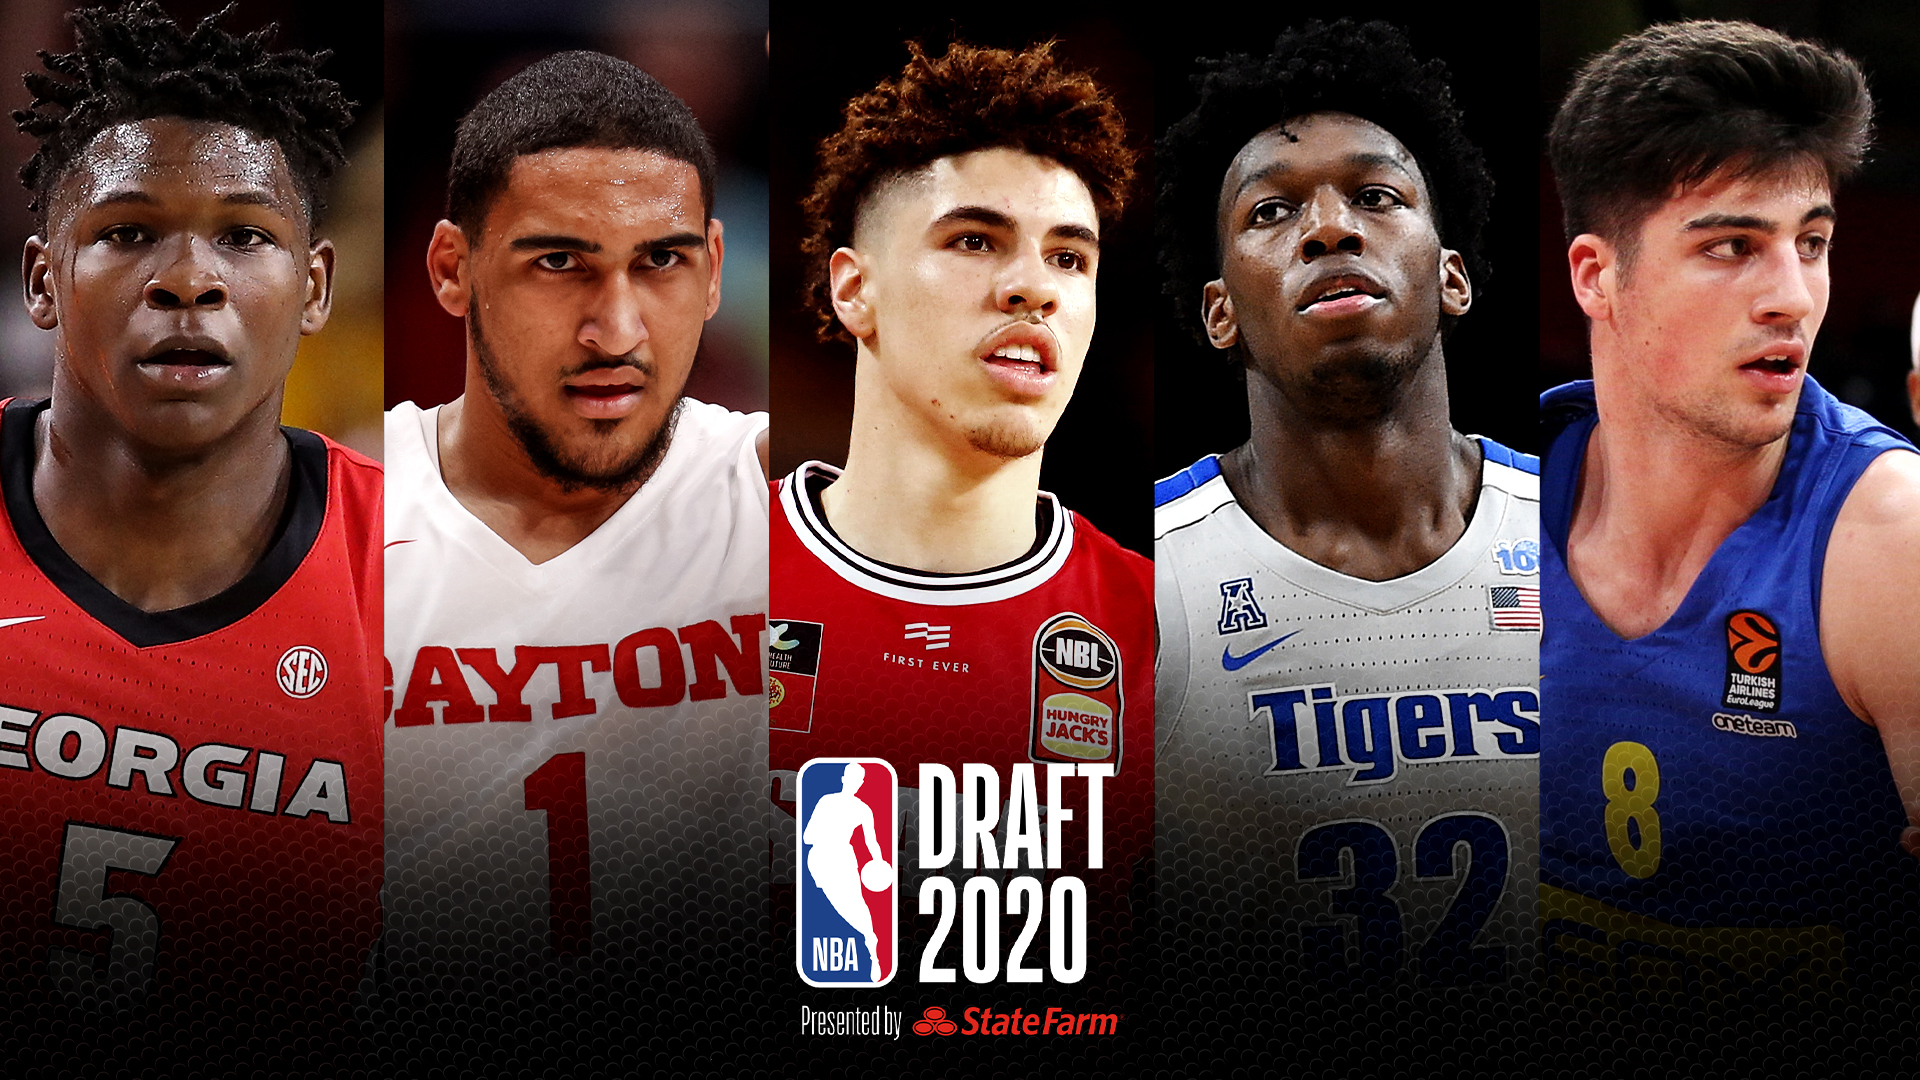 The First 5 NBA Picks for the 2020 Draft